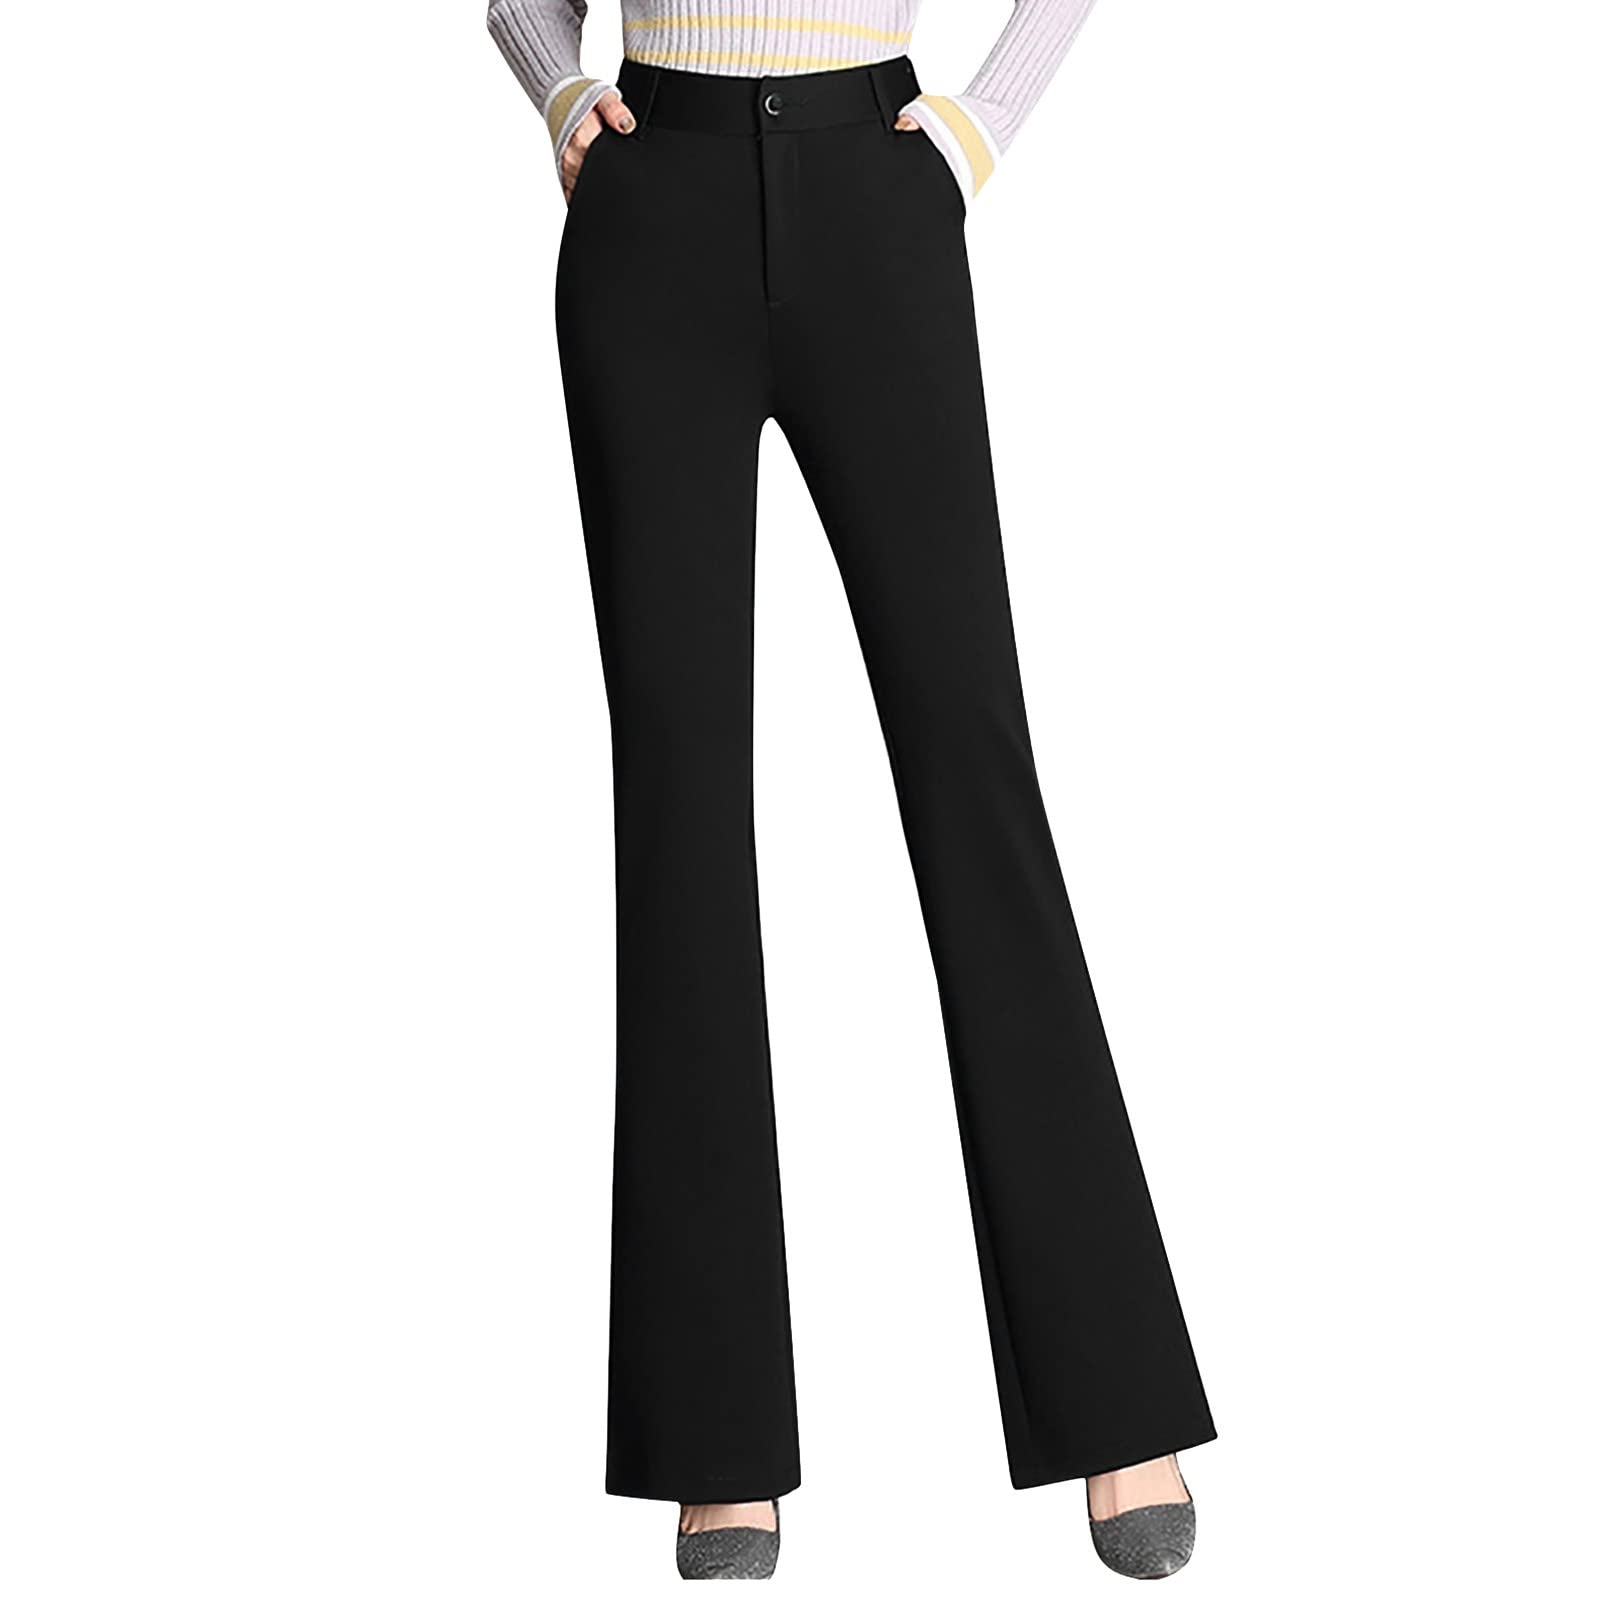 Women's High Waist Belted Wide Leg Pants with Pocket Casual Business Work  Office Palazzo Pants